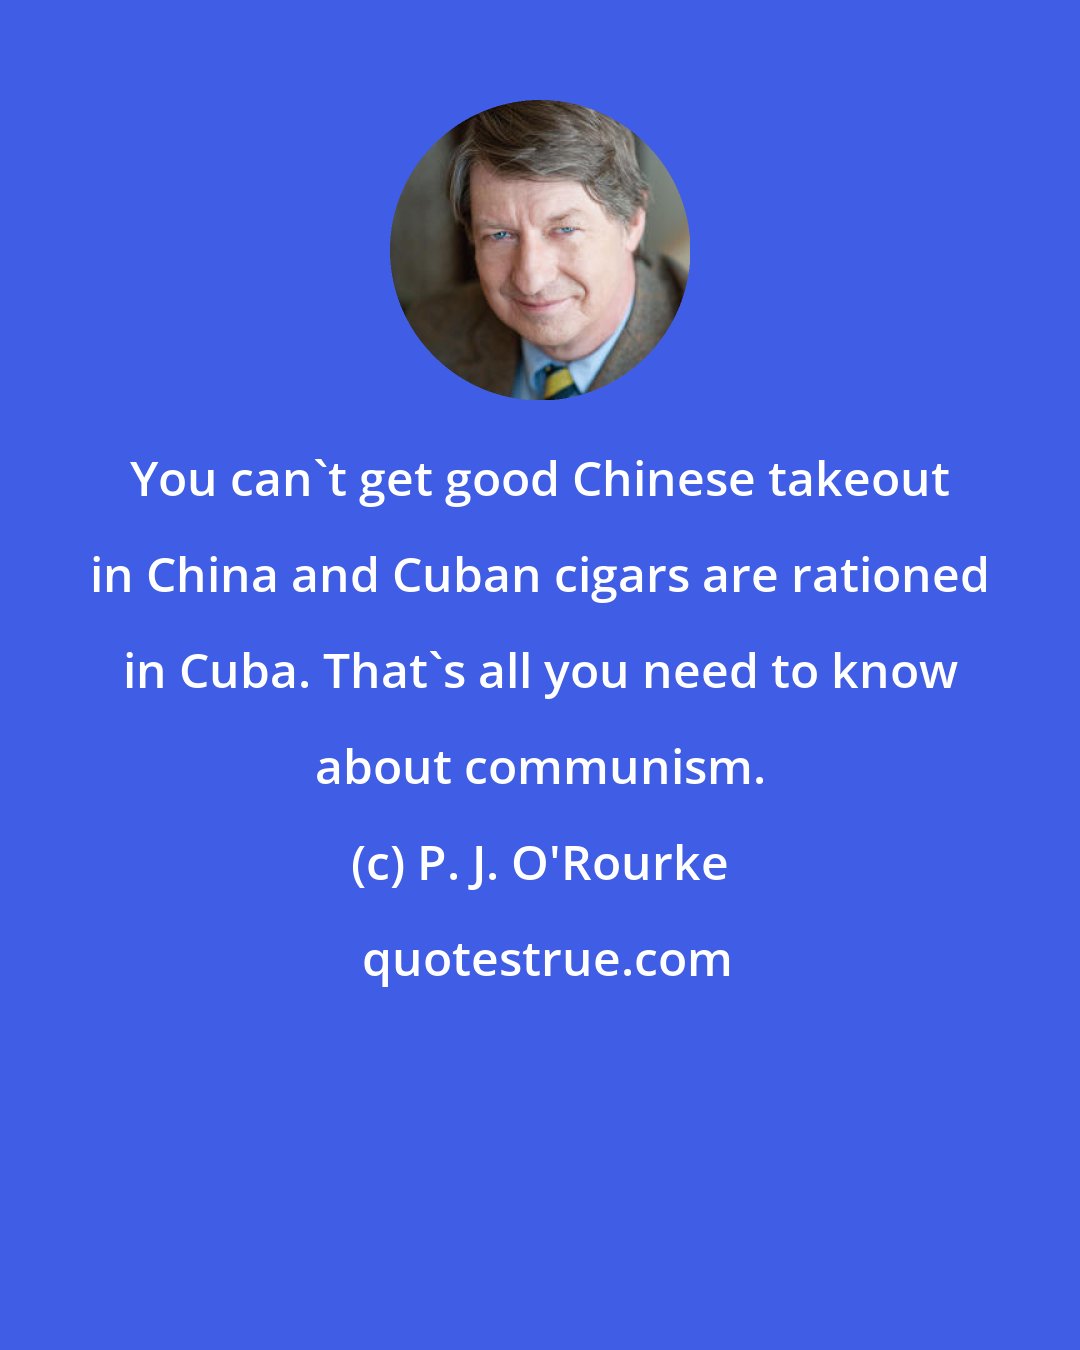 P. J. O'Rourke: You can't get good Chinese takeout in China and Cuban cigars are rationed in Cuba. That's all you need to know about communism.